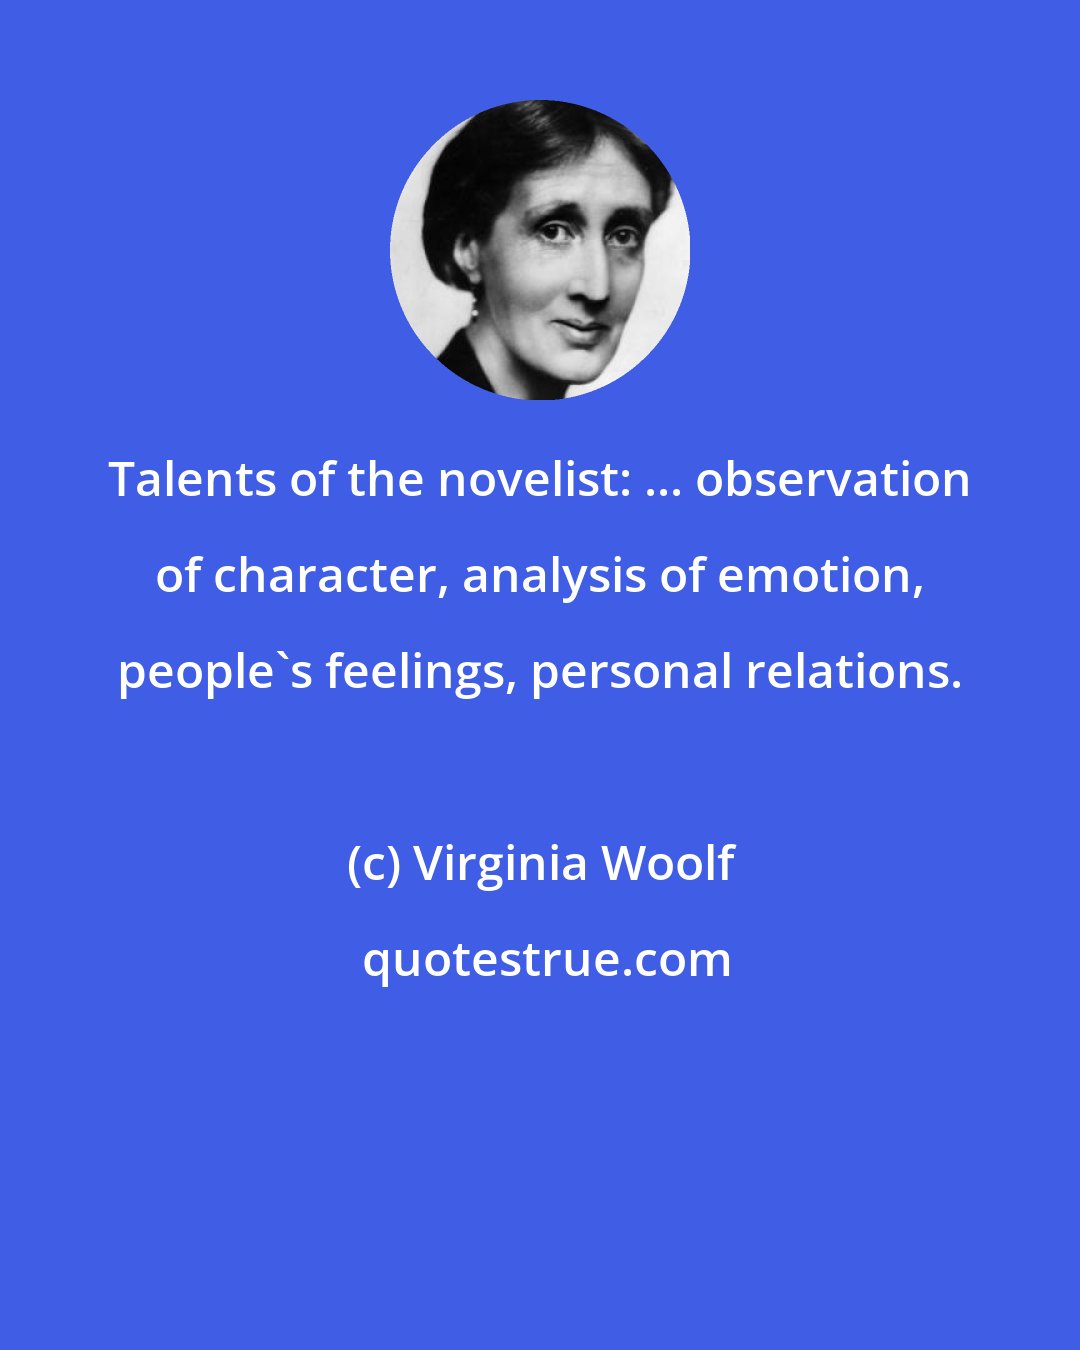 Virginia Woolf: Talents of the novelist: ... observation of character, analysis of emotion, people's feelings, personal relations.